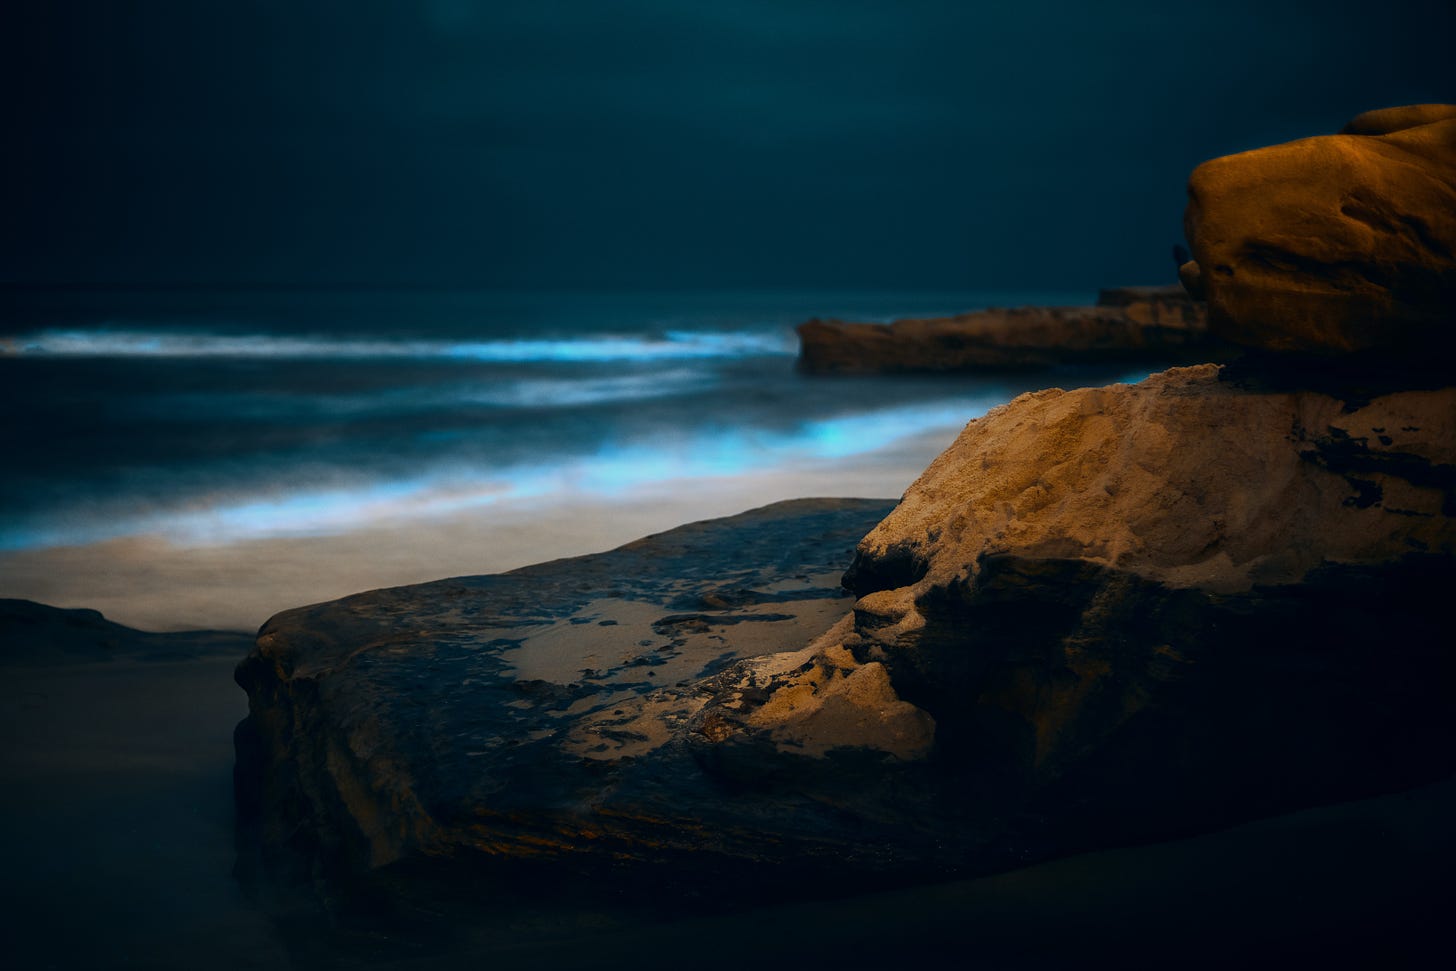 A beach at night, with rocks in the foreground, a strip of sand behind them, and, in the hazy distance, a dark sea fringed with electric blue bioluminescence.